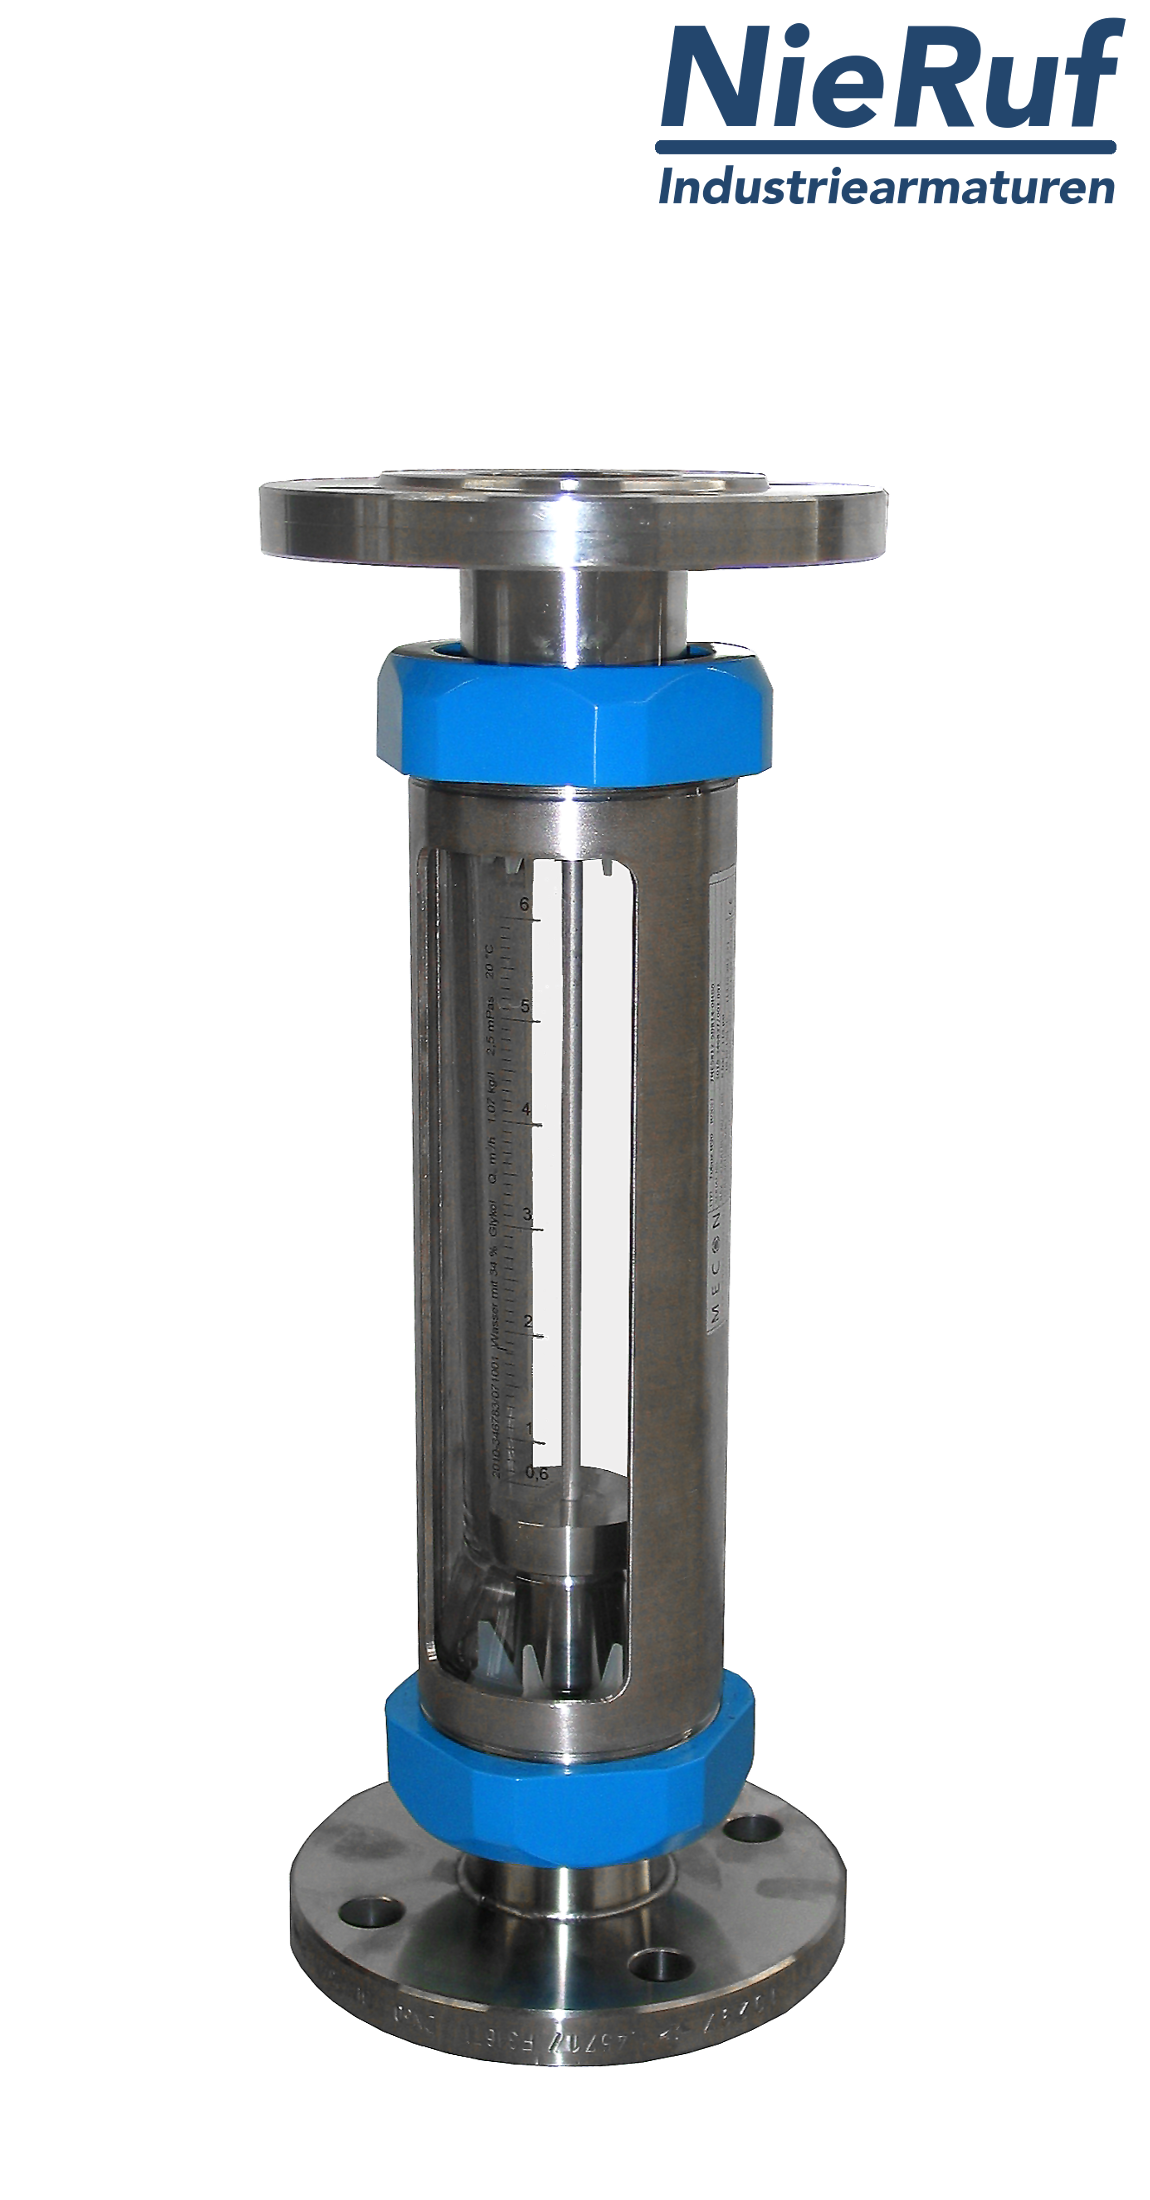 Variable area flowmeter stainless steel + borosilicate flange DN40 125.0 - 1250 l/h water FKM